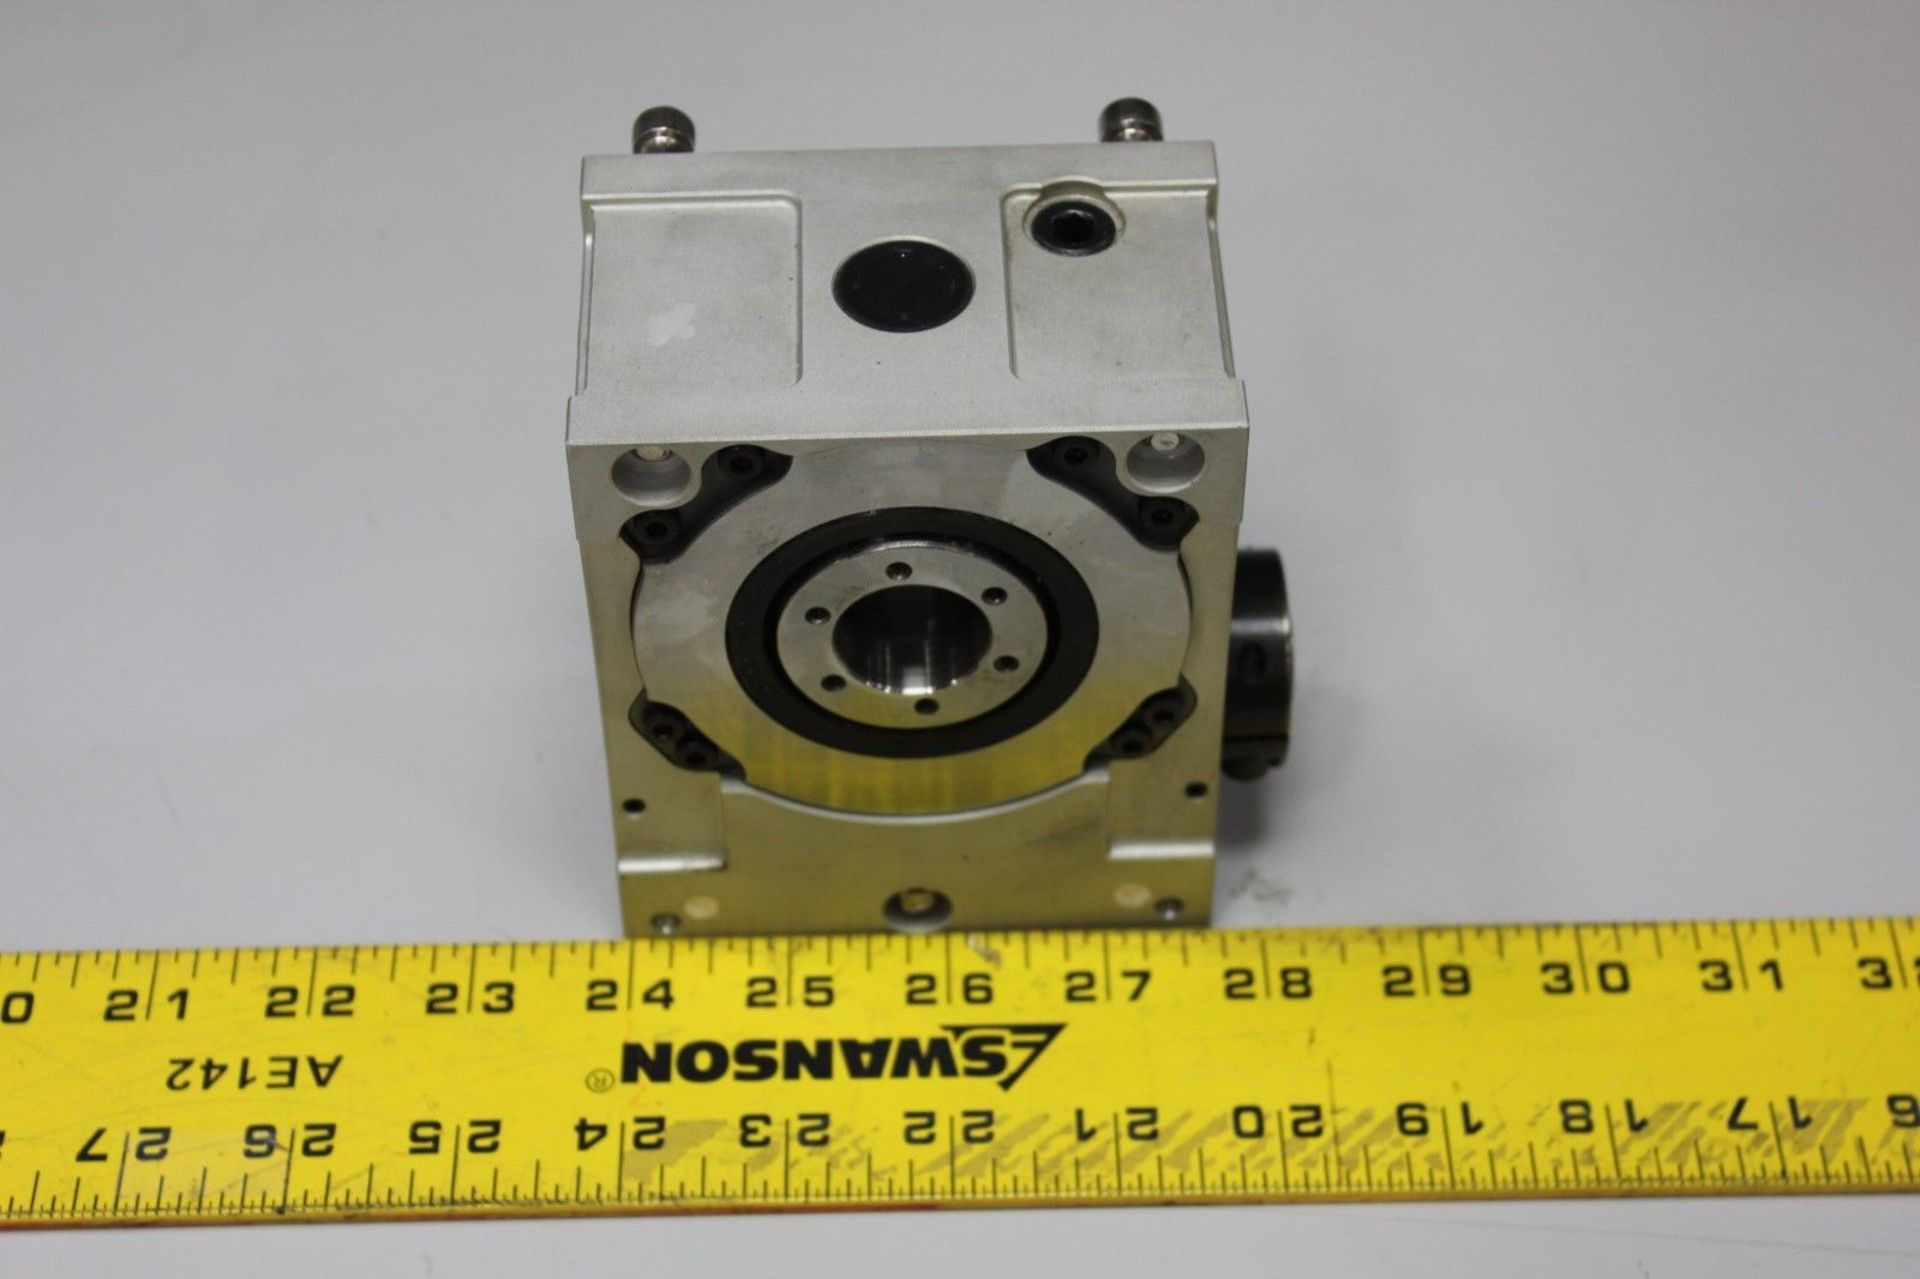 Yangheon ServoCamdrive Rotary Cam Drive Reducer Positioner Servo Indexing drive - Image 2 of 3